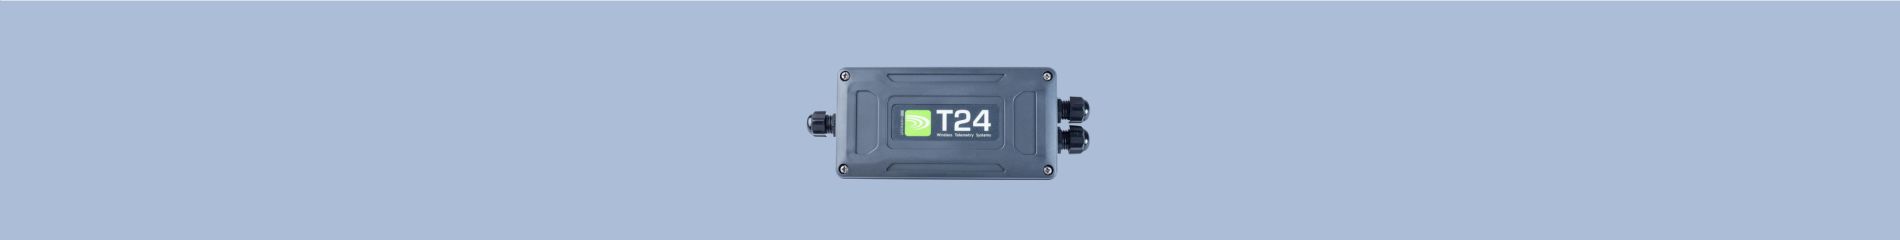 T24-RM1 Wireless Relay Output Module